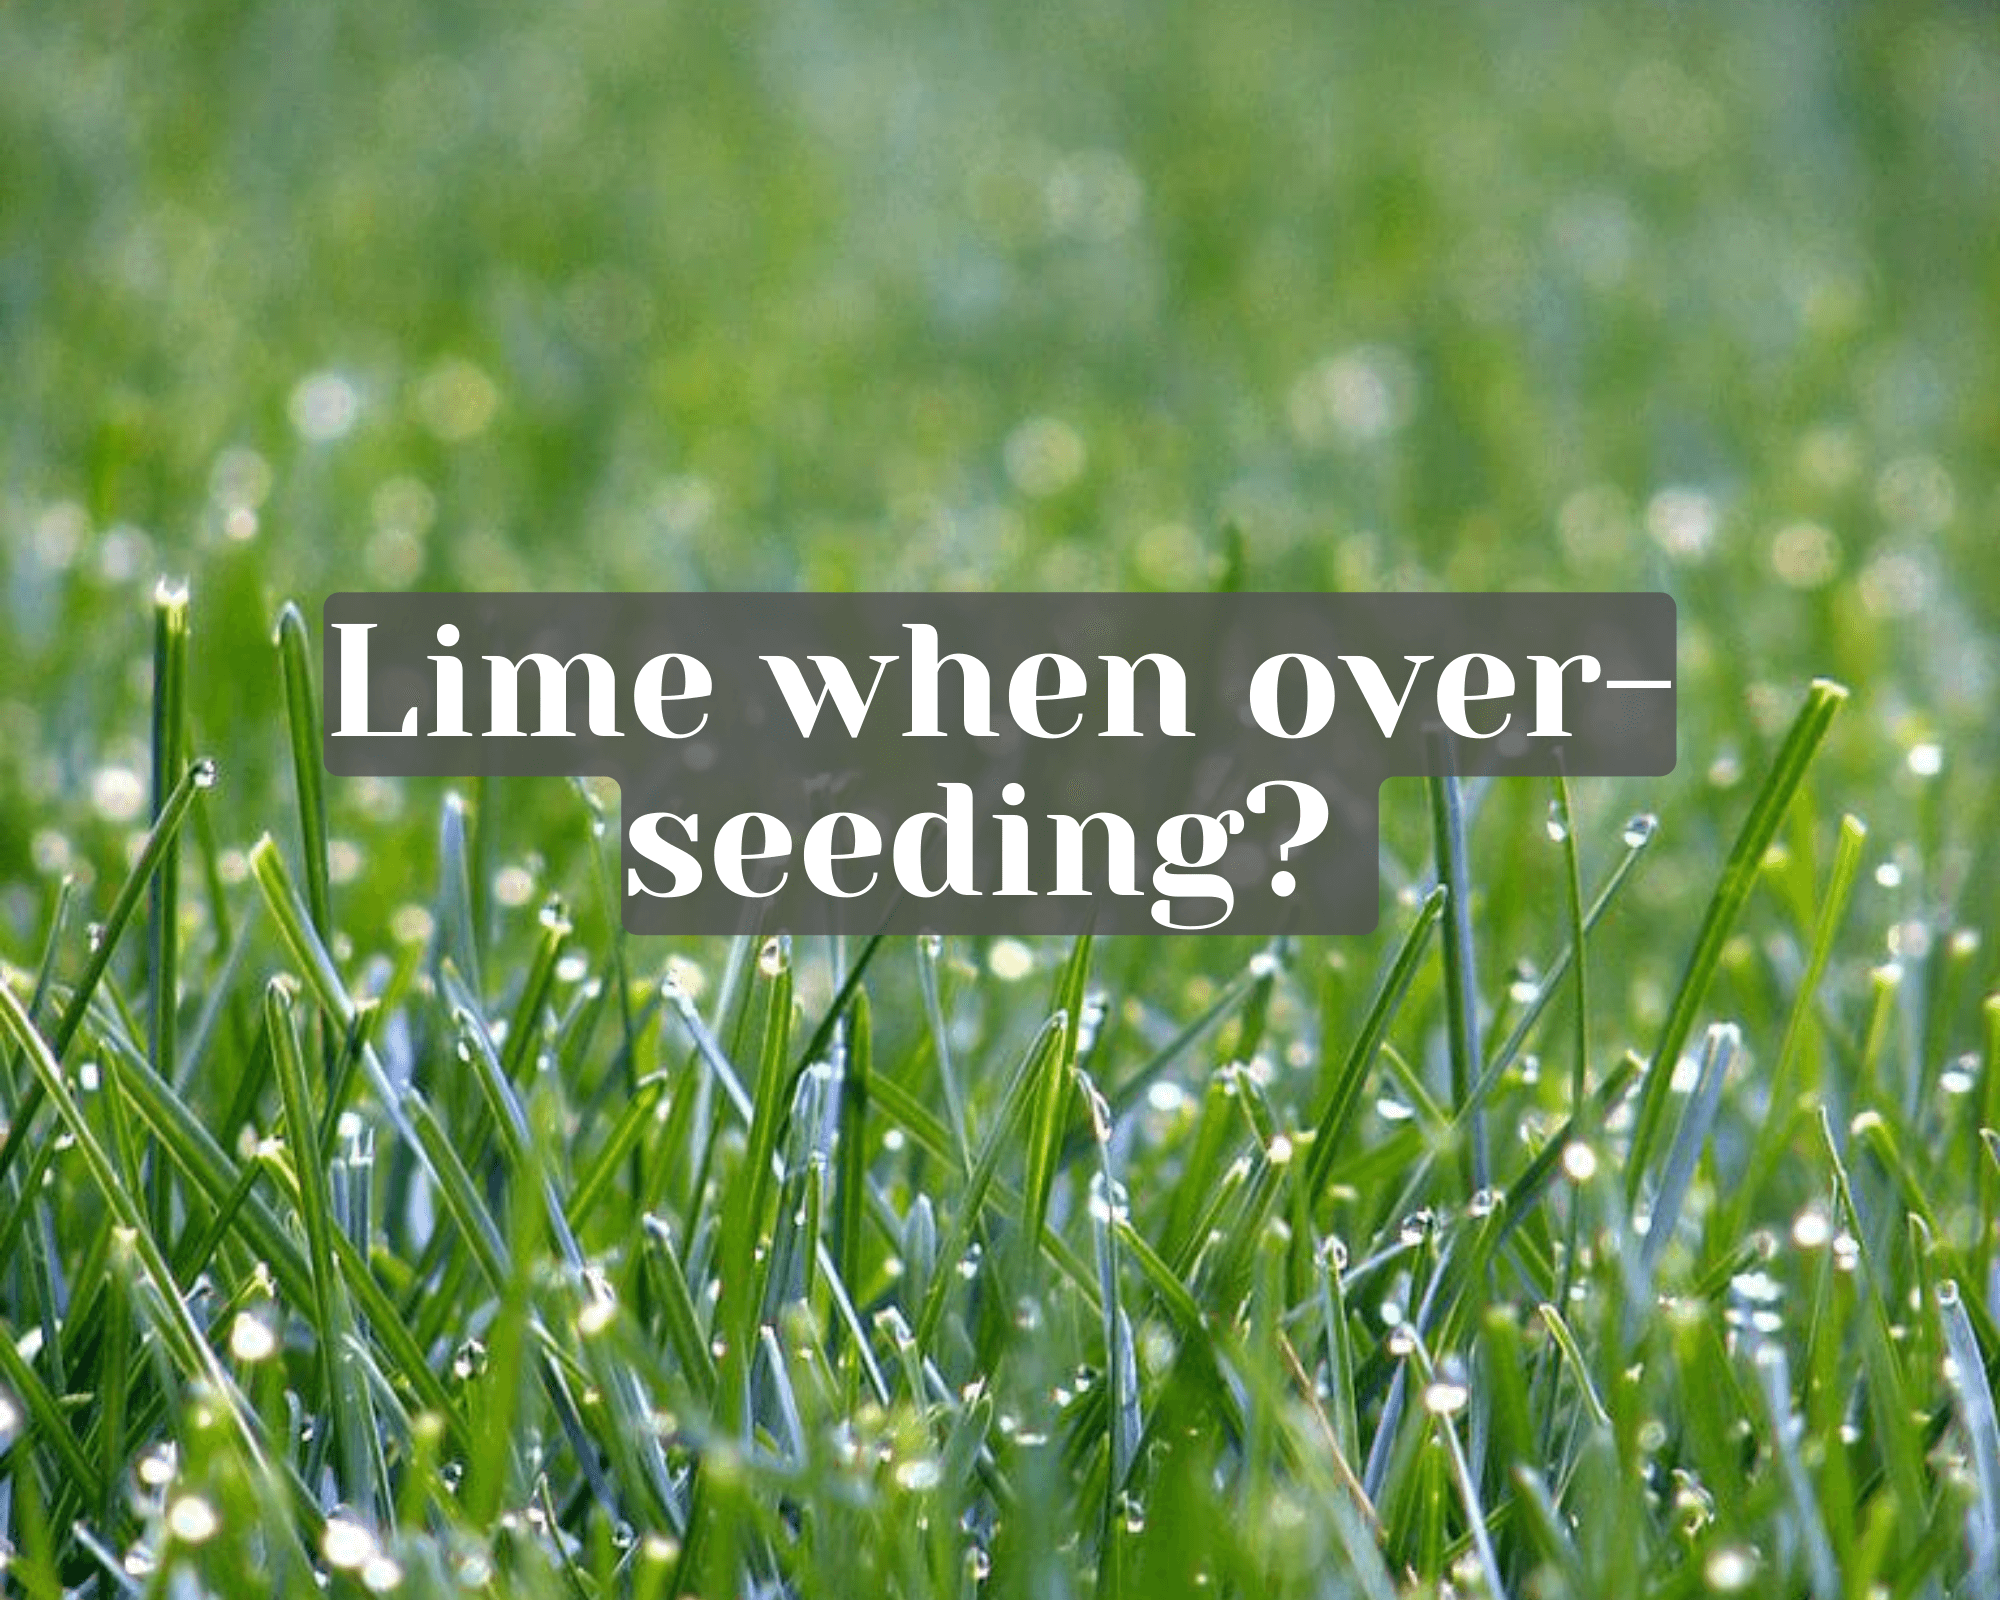 Should you put lime down when overseeding?